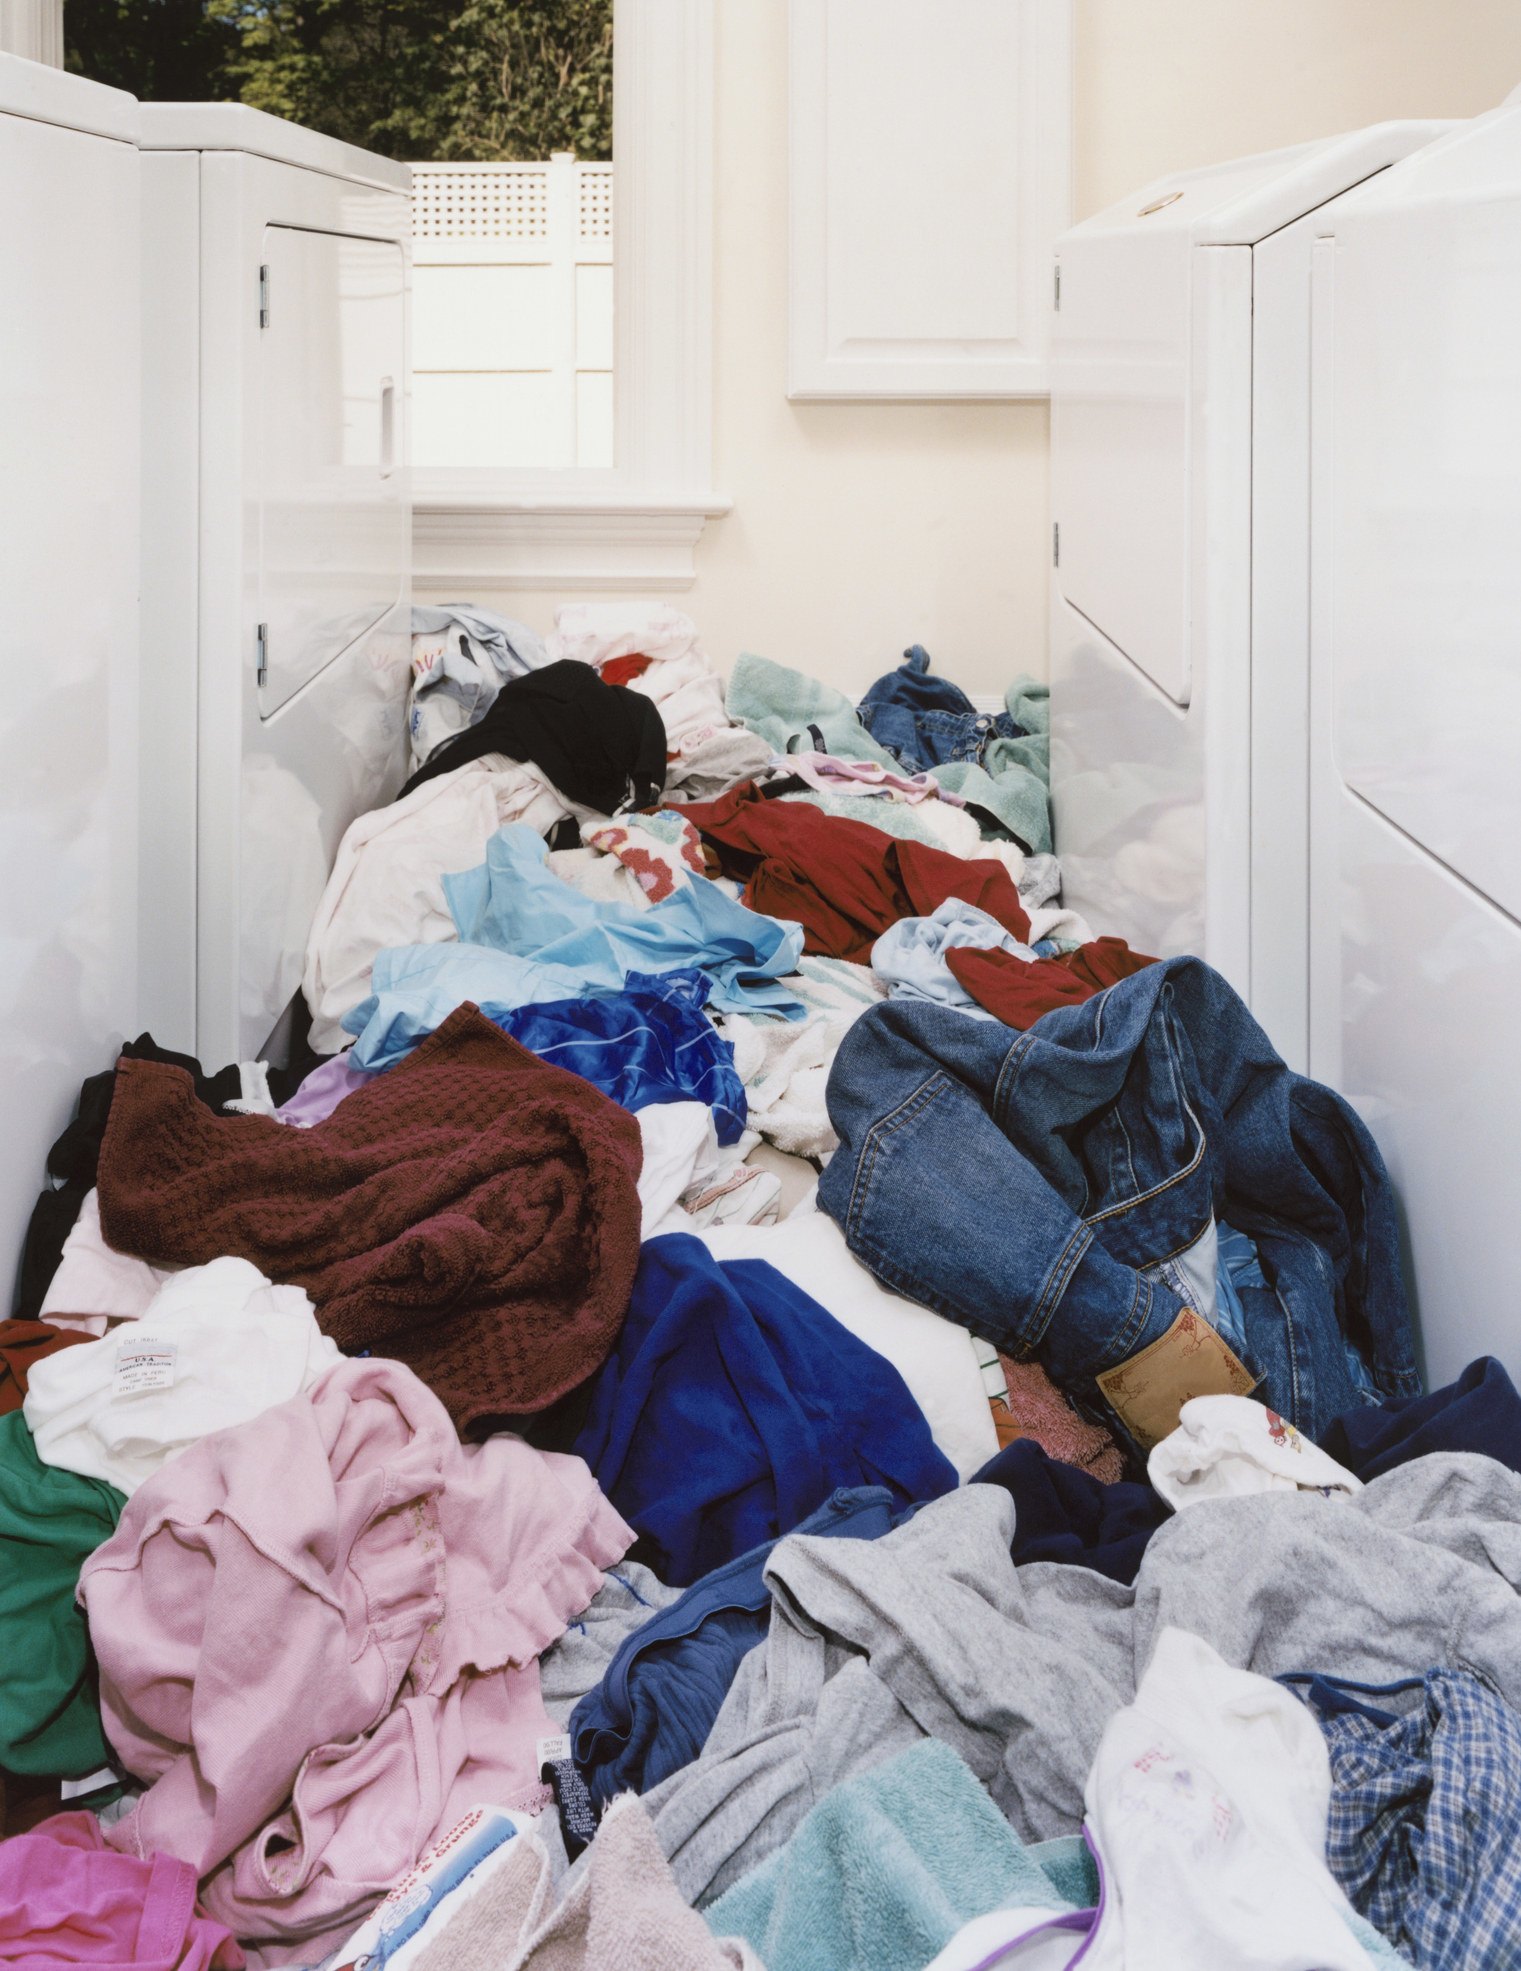 A laundry room with a knee-deep pile of laundry